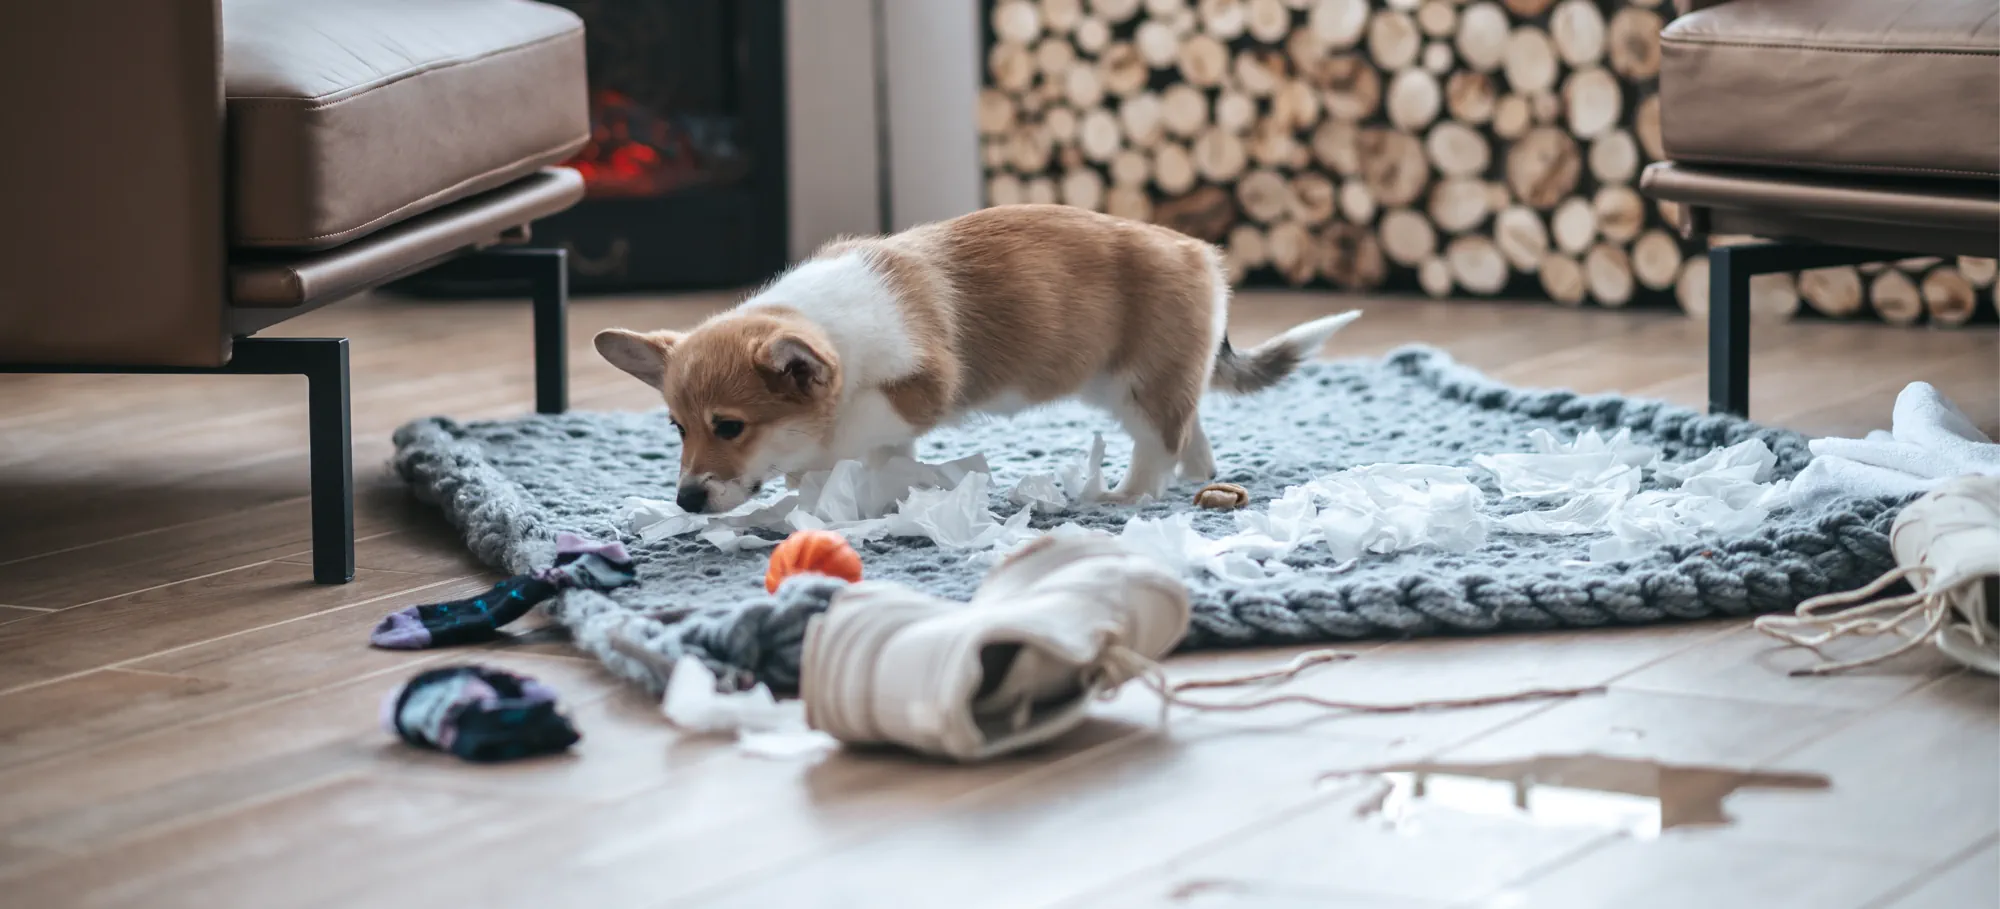 Cute little dog making a big mess on the living room floor.